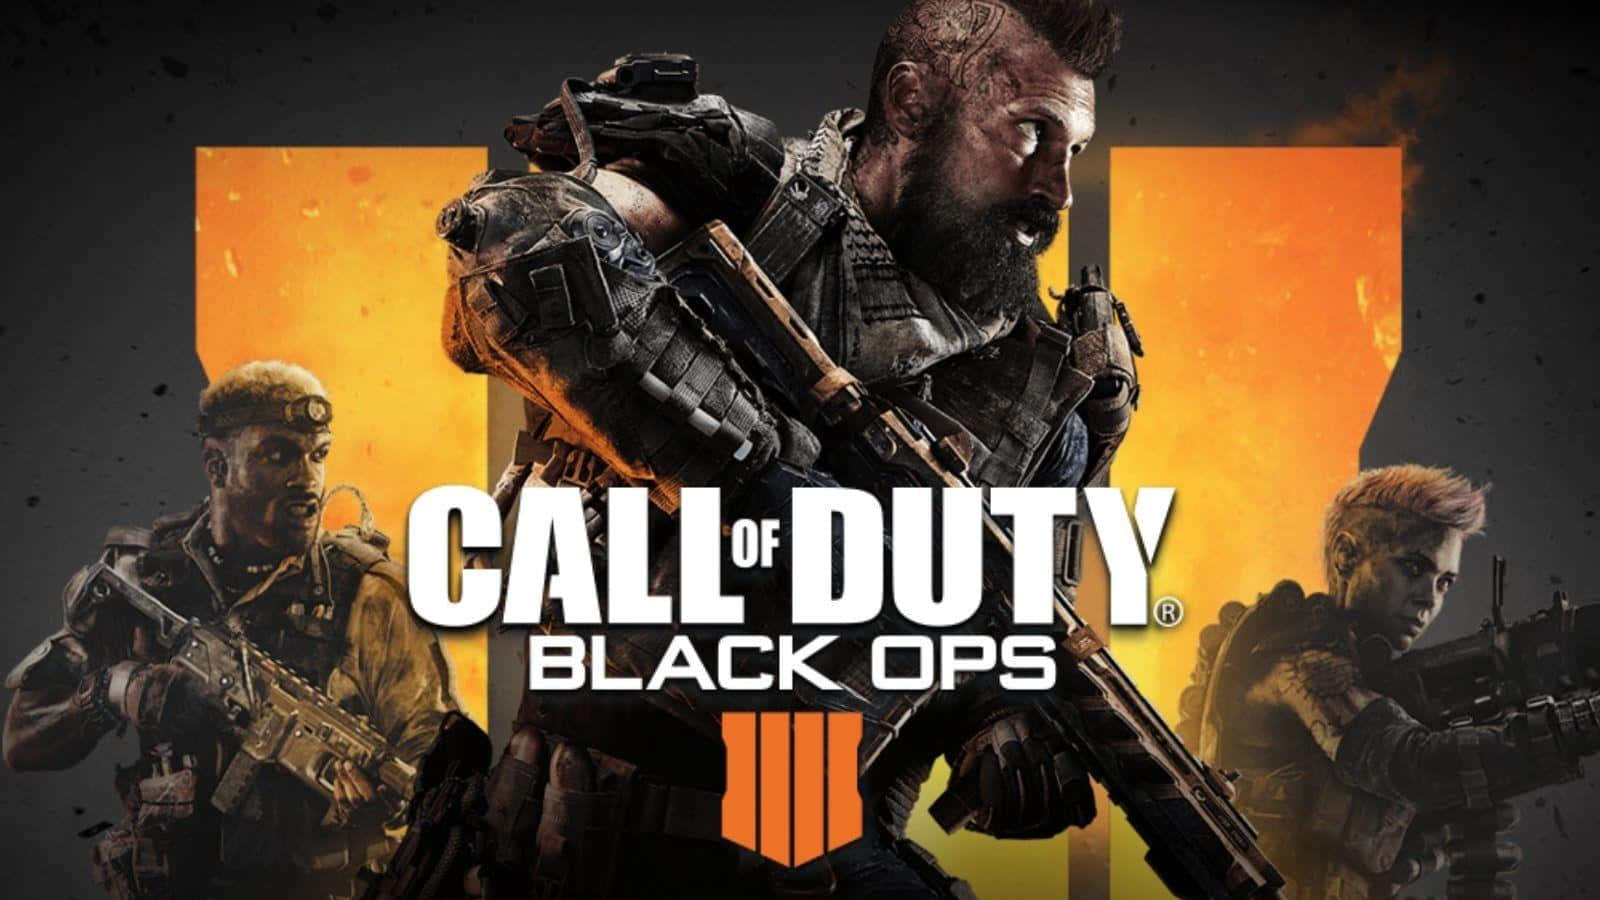 Call of Duty Black ops 4 геймплей. Call of Duty Black ops 4 сюжет. Call of Duty: Black ops 4 (2018). Call of Duty Black ops 4 персонажи. Игра call of duty black ops 4